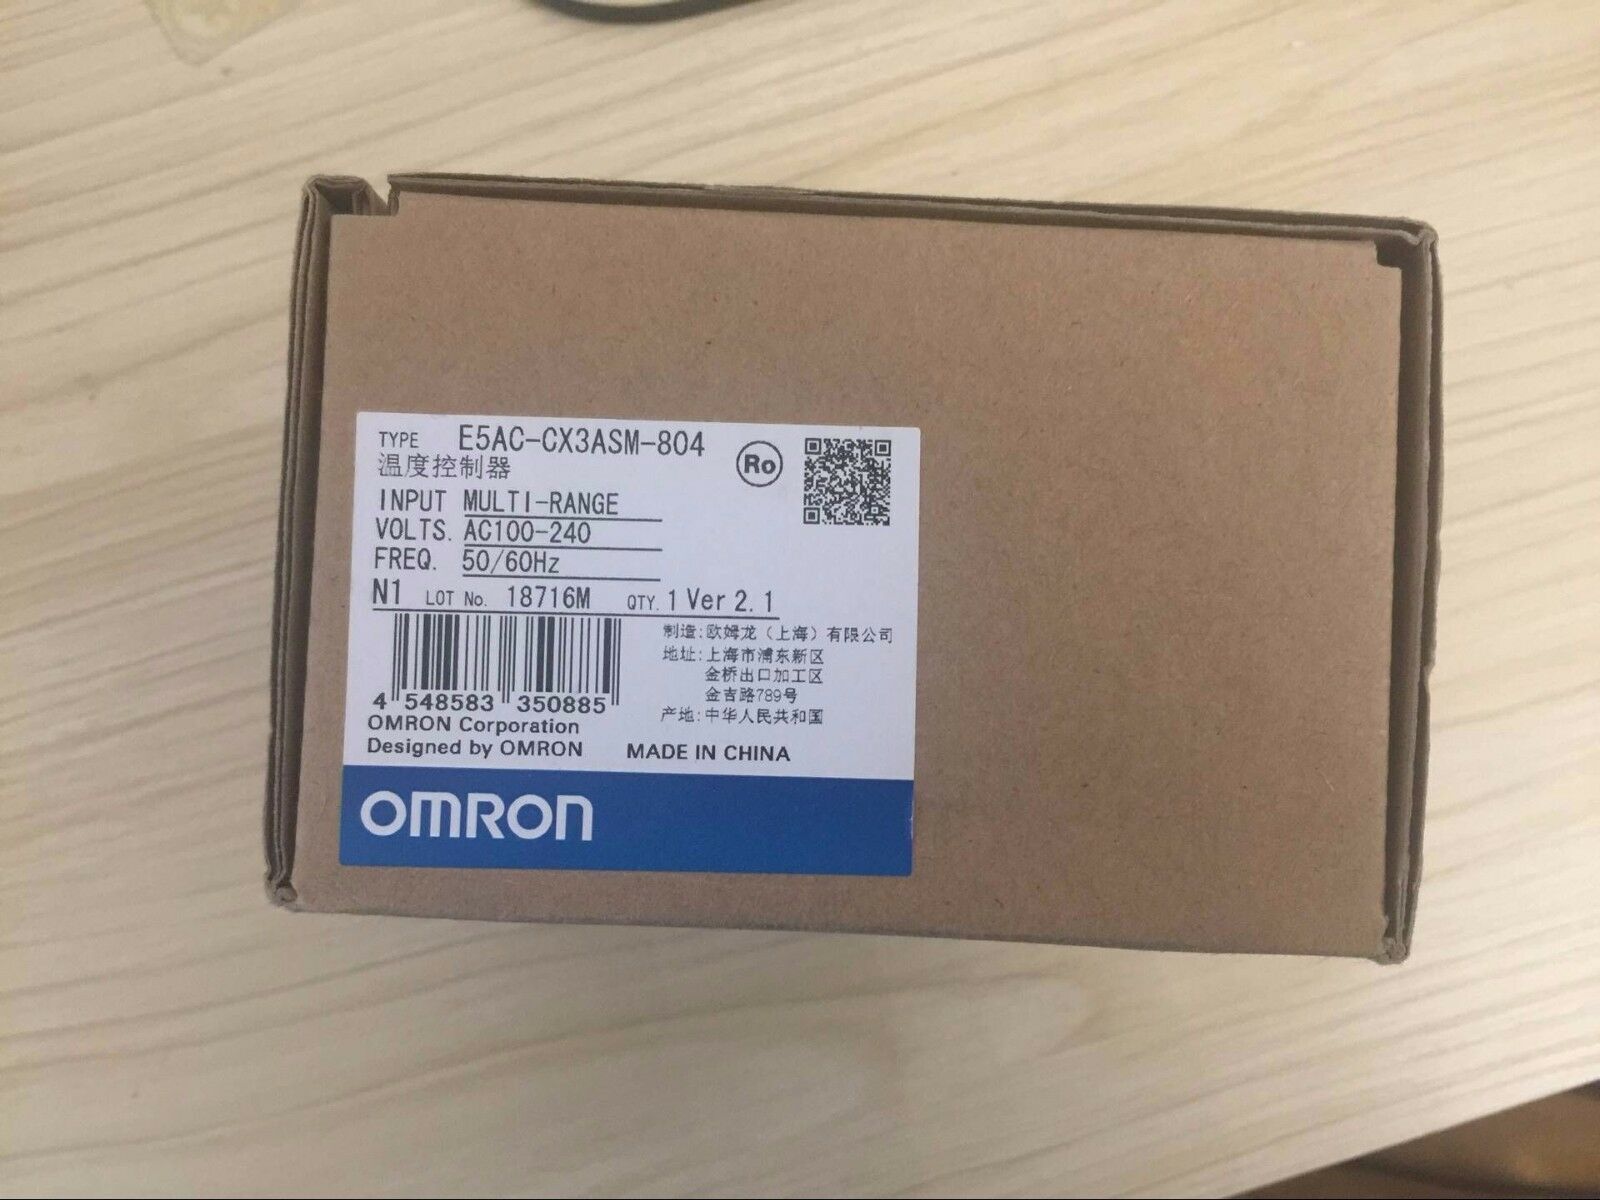 new ONE  Omron thermostat E5AC-CX3ASM-804 one-year